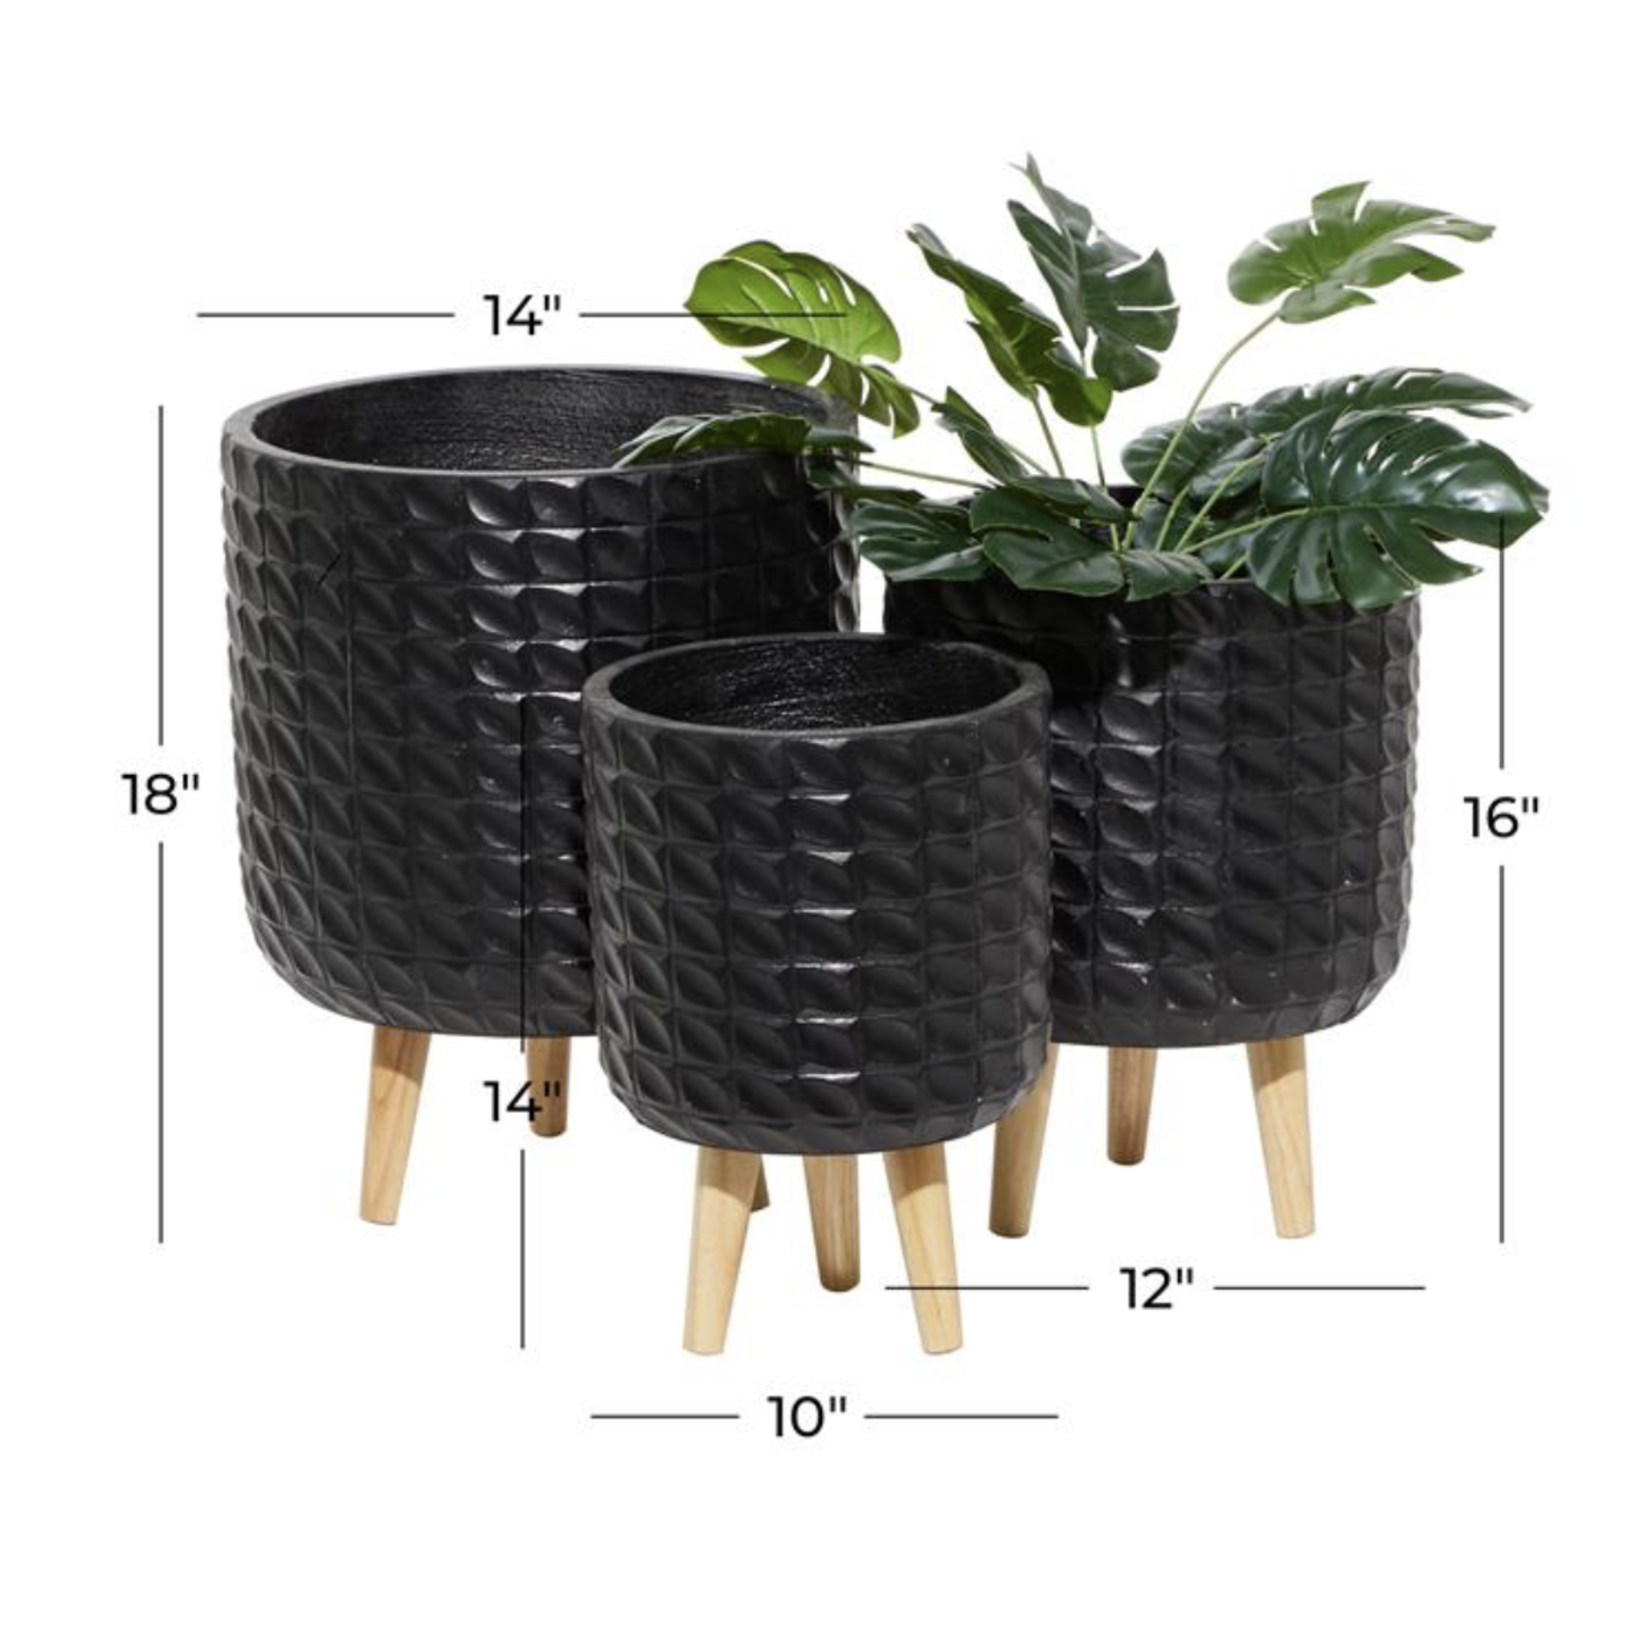 18”H X 14” LARGE  MAGNESIUM OXIDE INDOOR OUTDOOR PLANTER WITH WOOD LEGS (NOT WATER TIGHT)